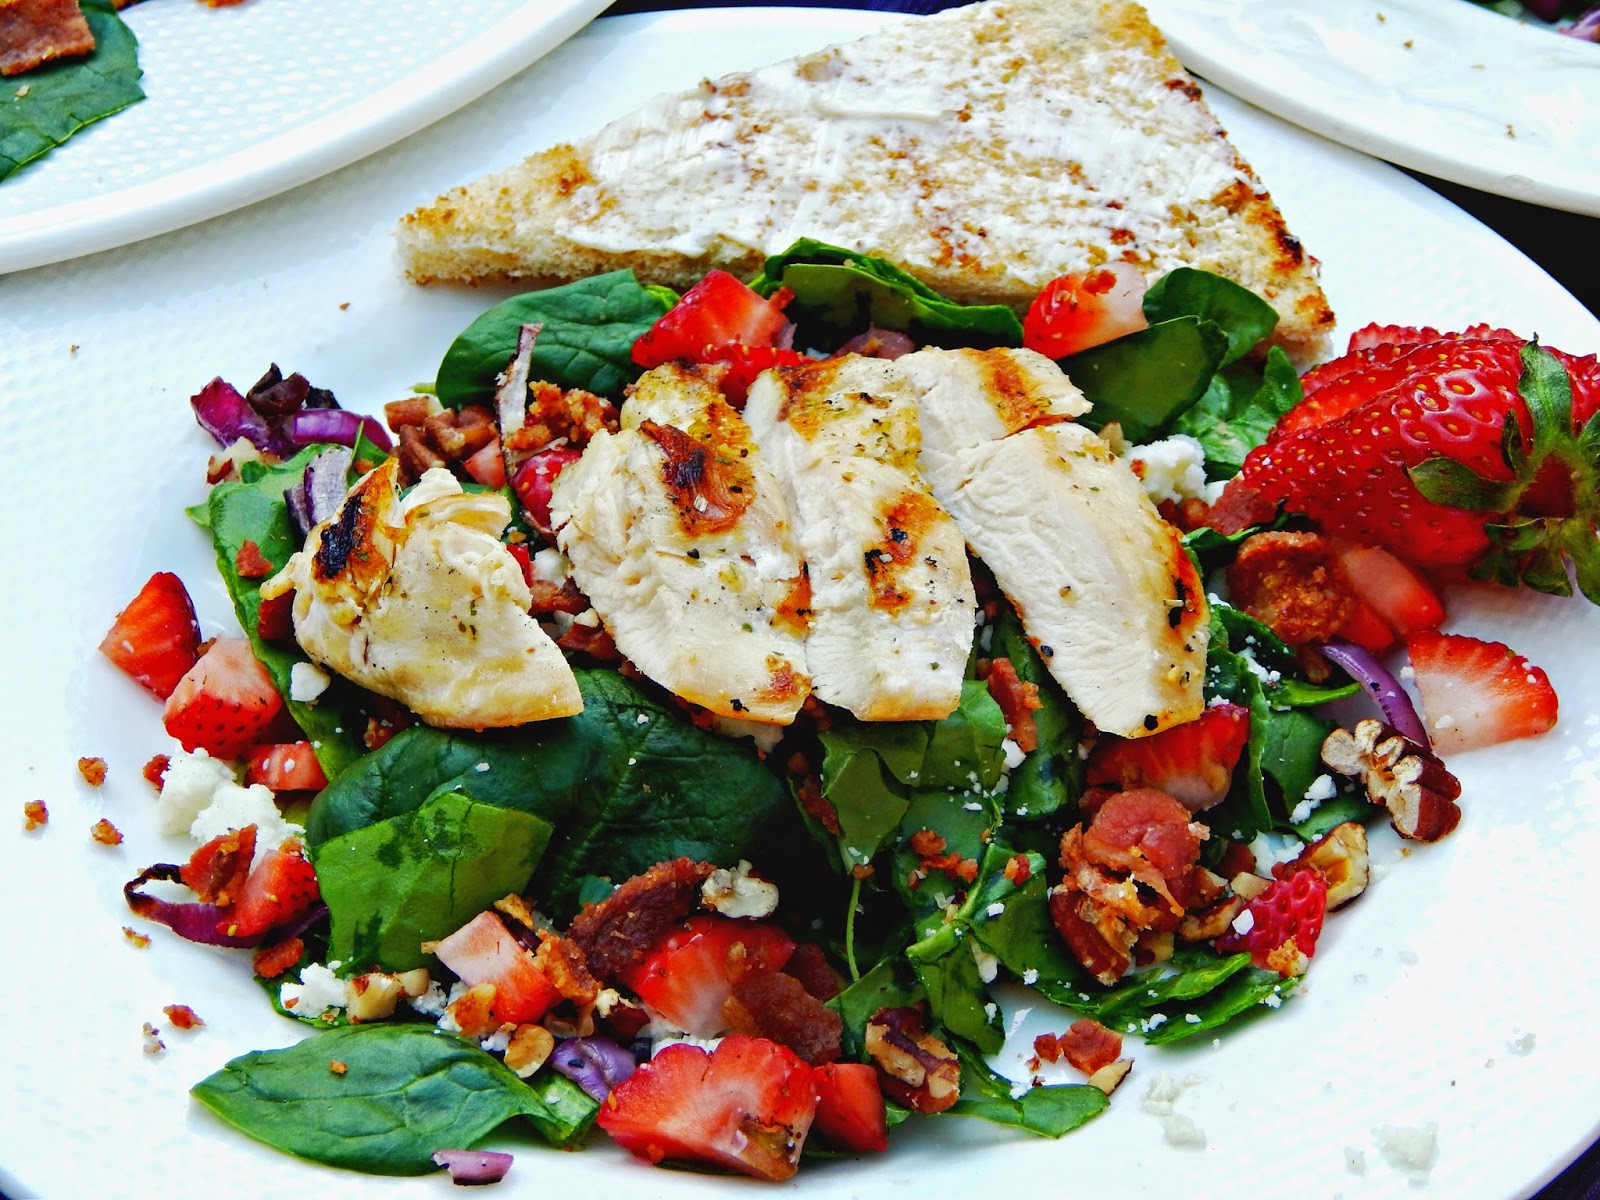 Strawberry grilled chicken salad is healthy and delicious!